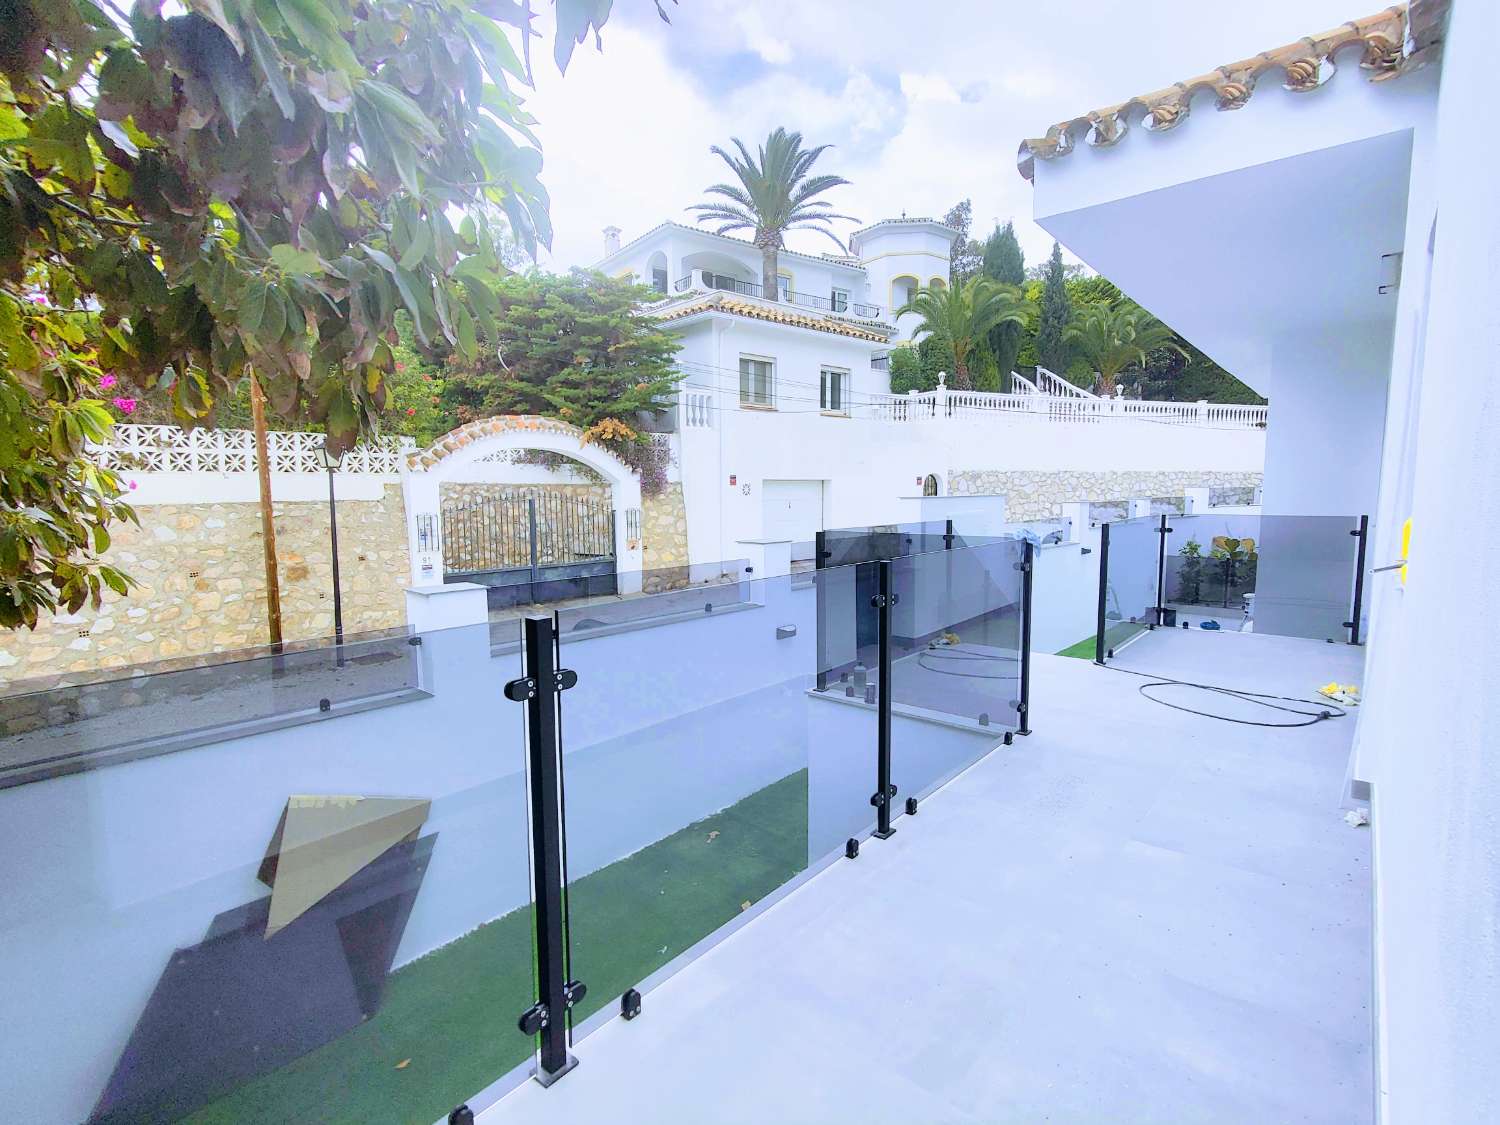 Spectacular Villa in La Cala de Mijas 677 meters in a straight line from the beach and with sea views.